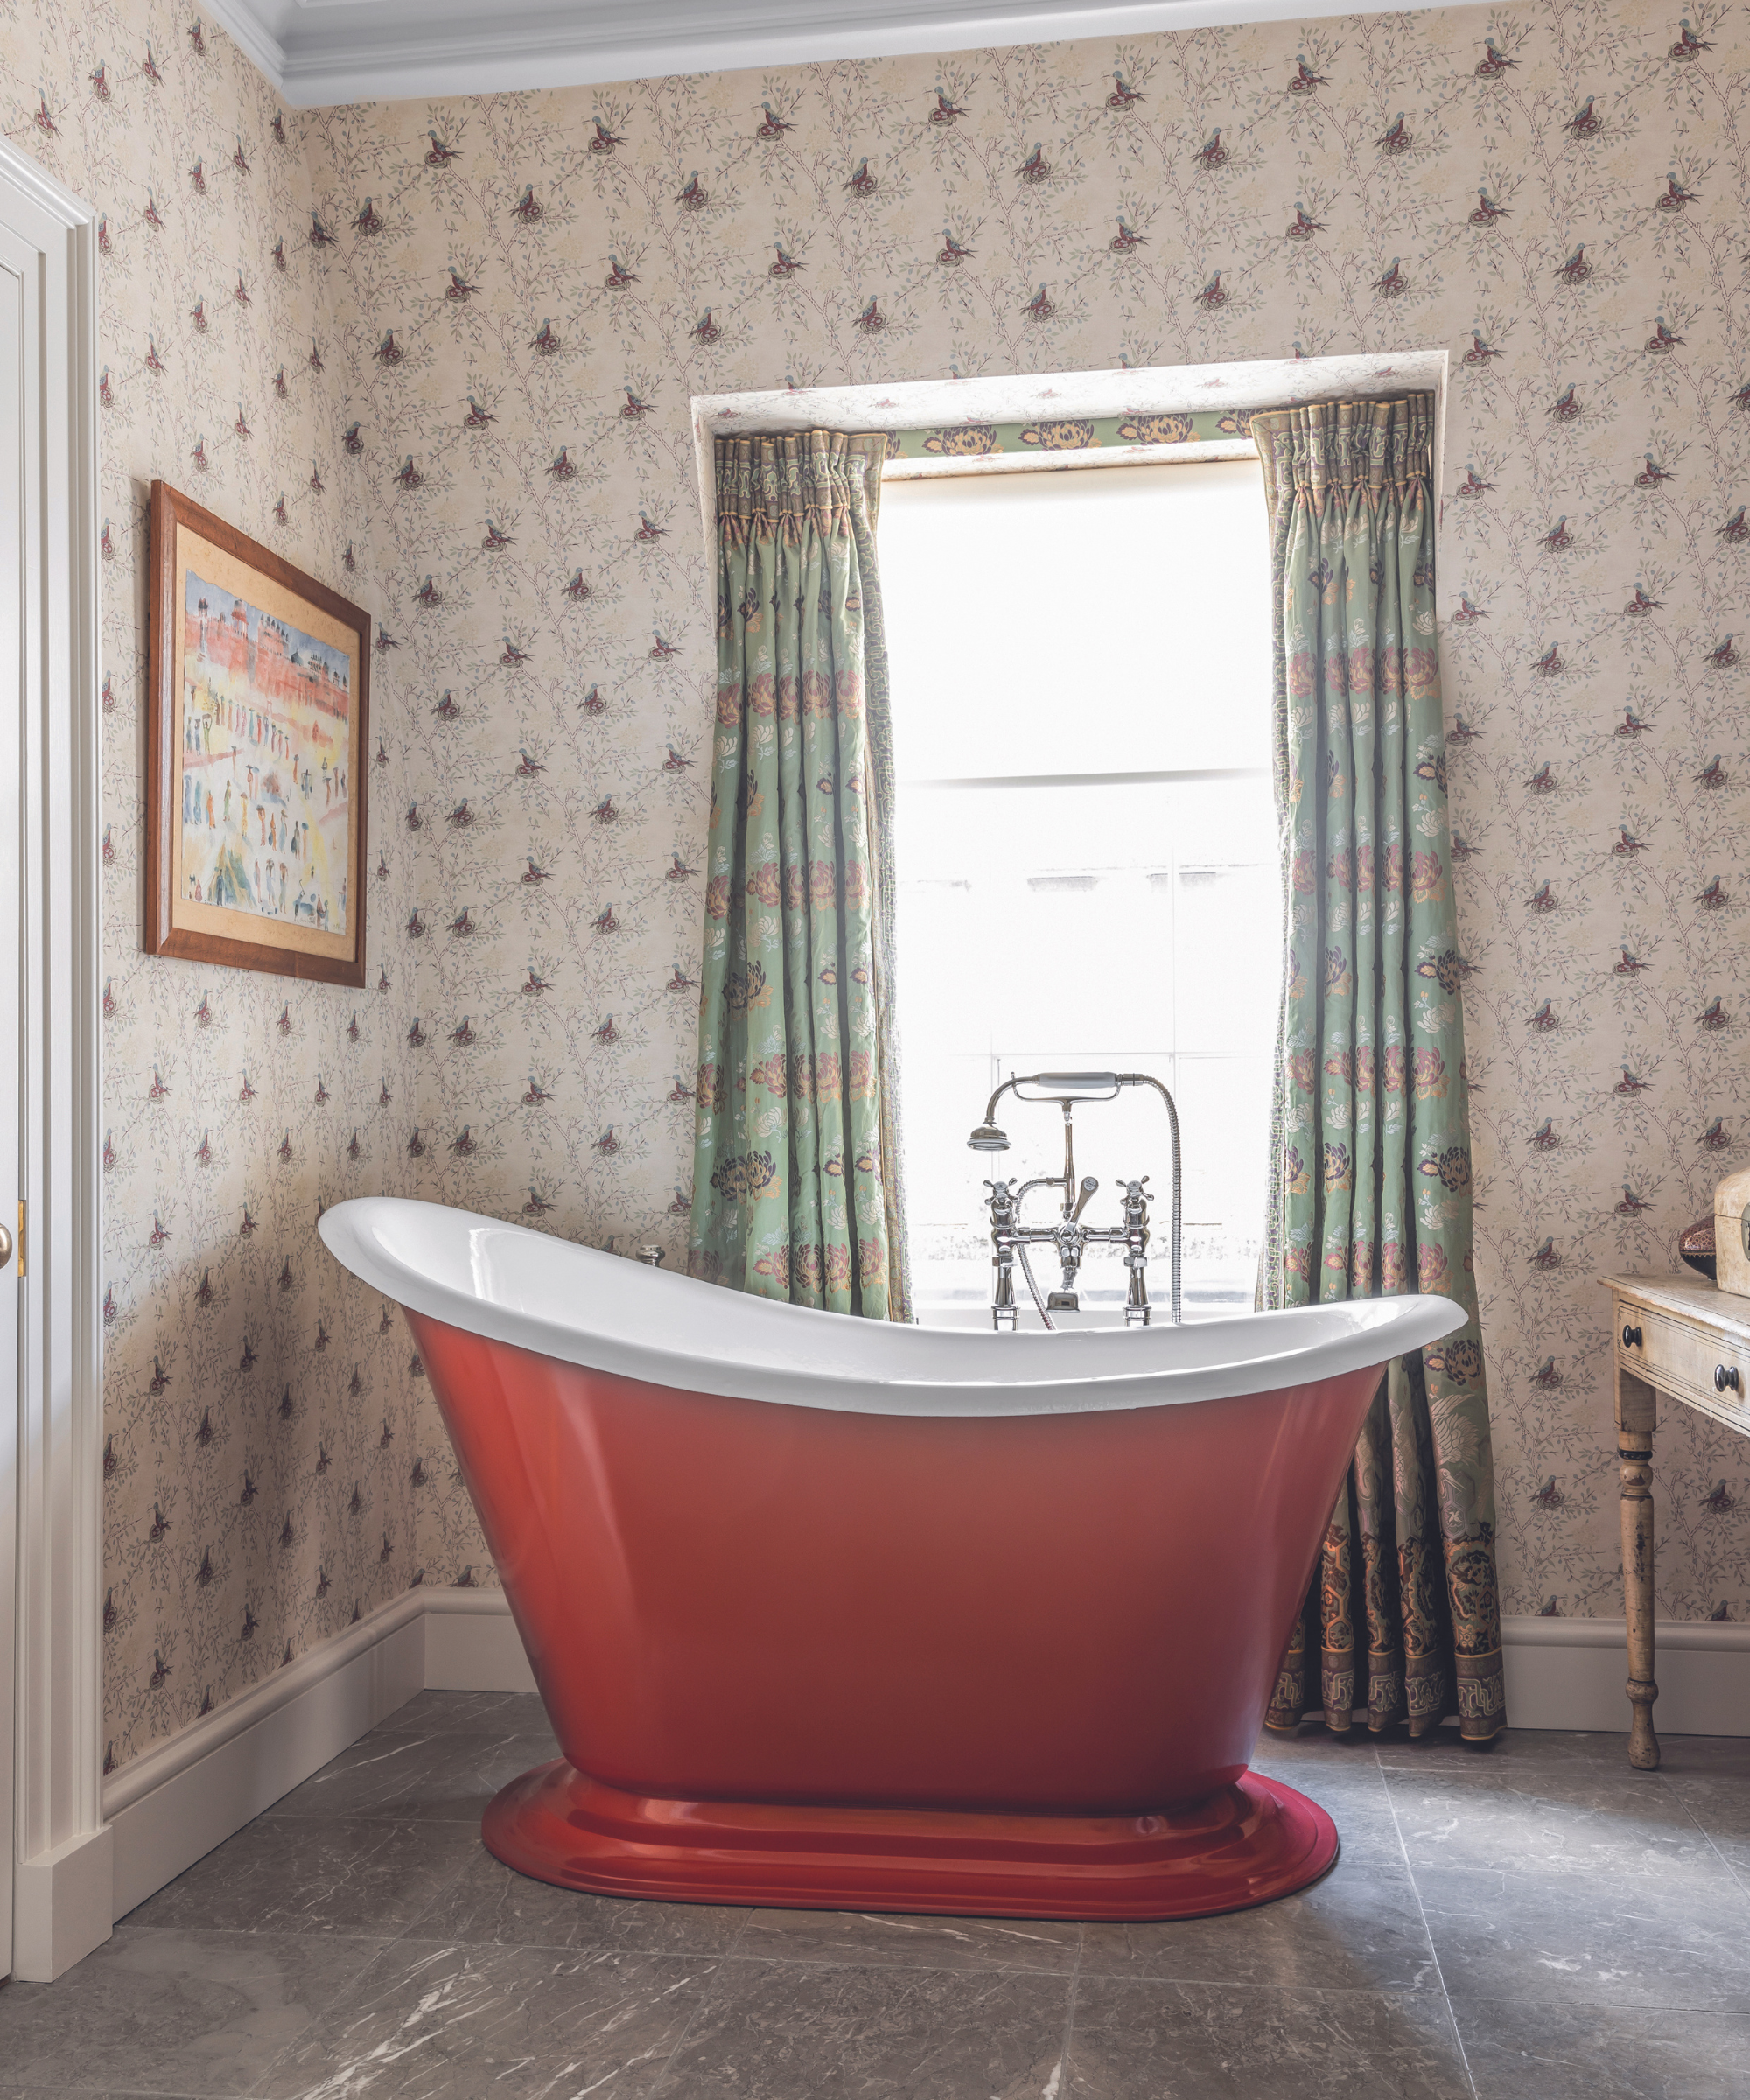 red freestanding bath in bathroom with grey stone floor and patterned wallpaper and curtains